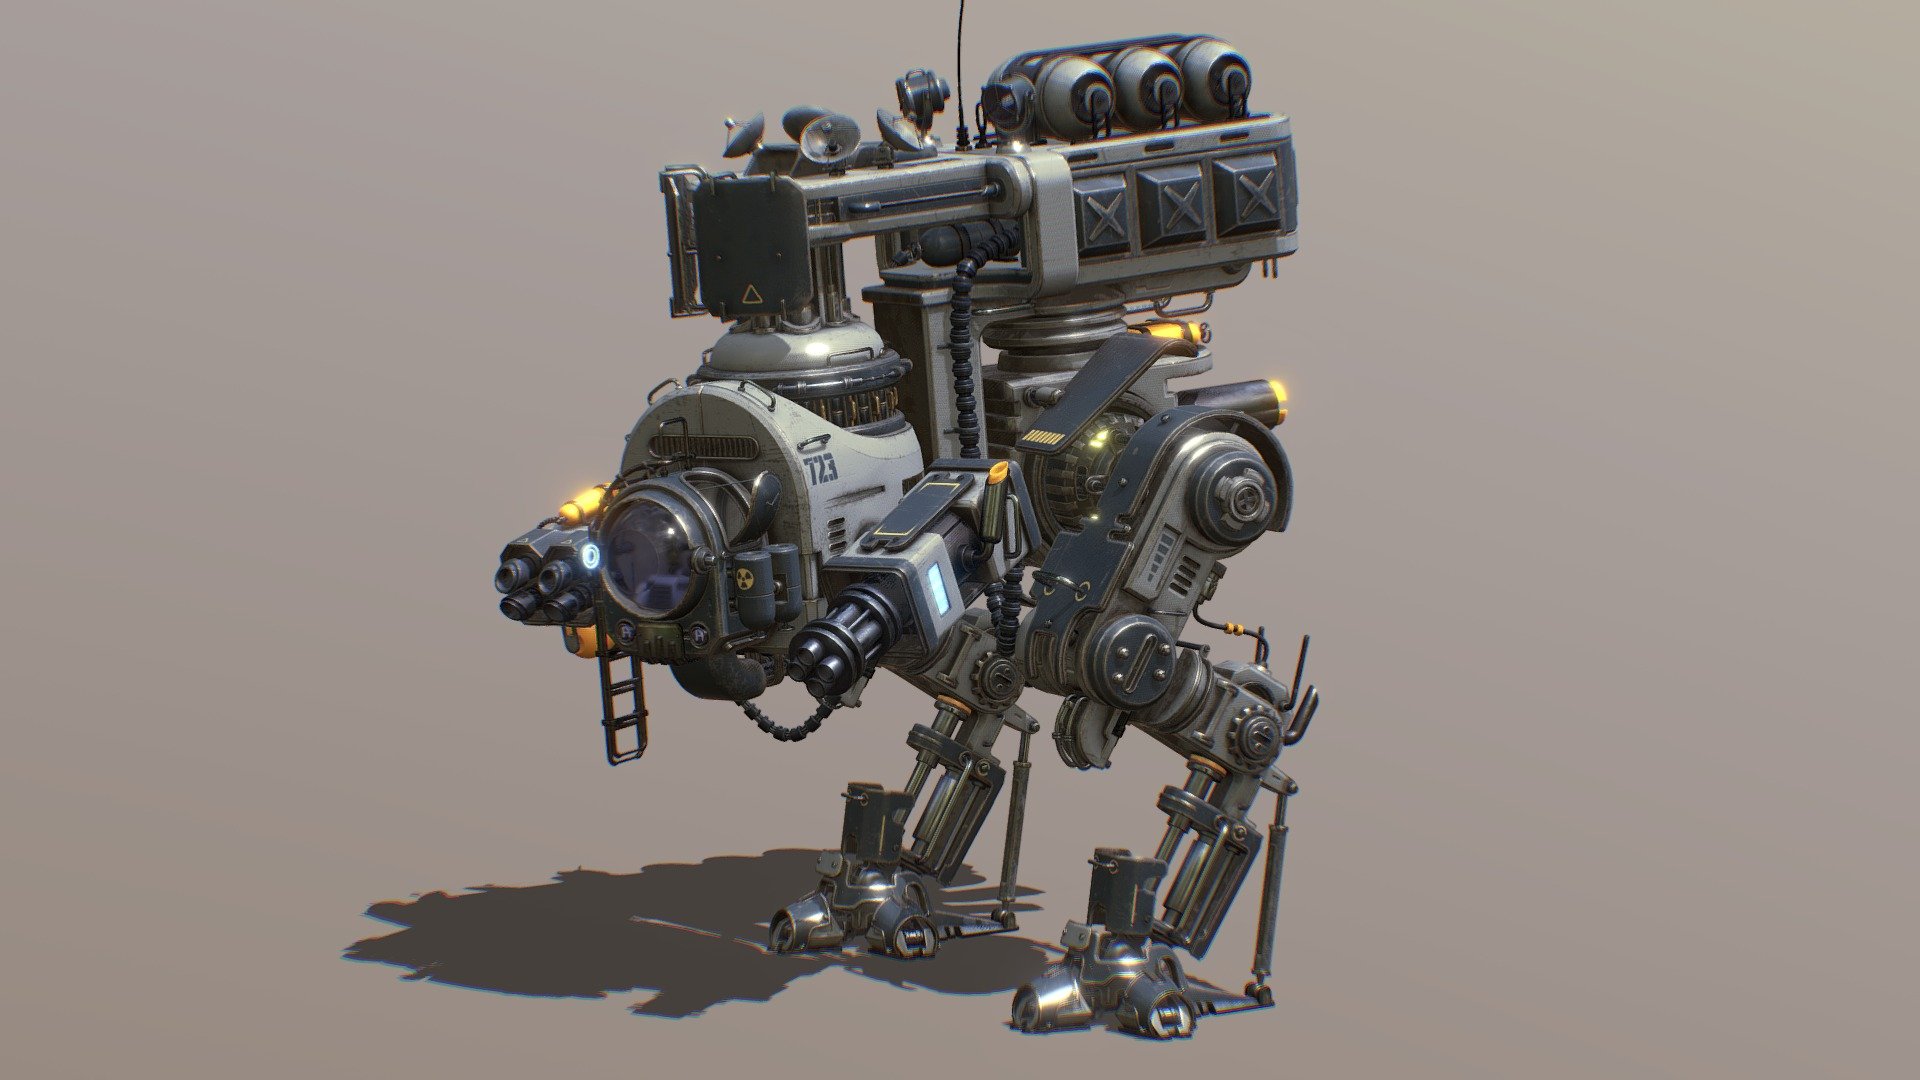 The Leviathan Police Mech was a simple mech concept I made as a fun personal project.

It was made with Blender 3.6.4 3d model